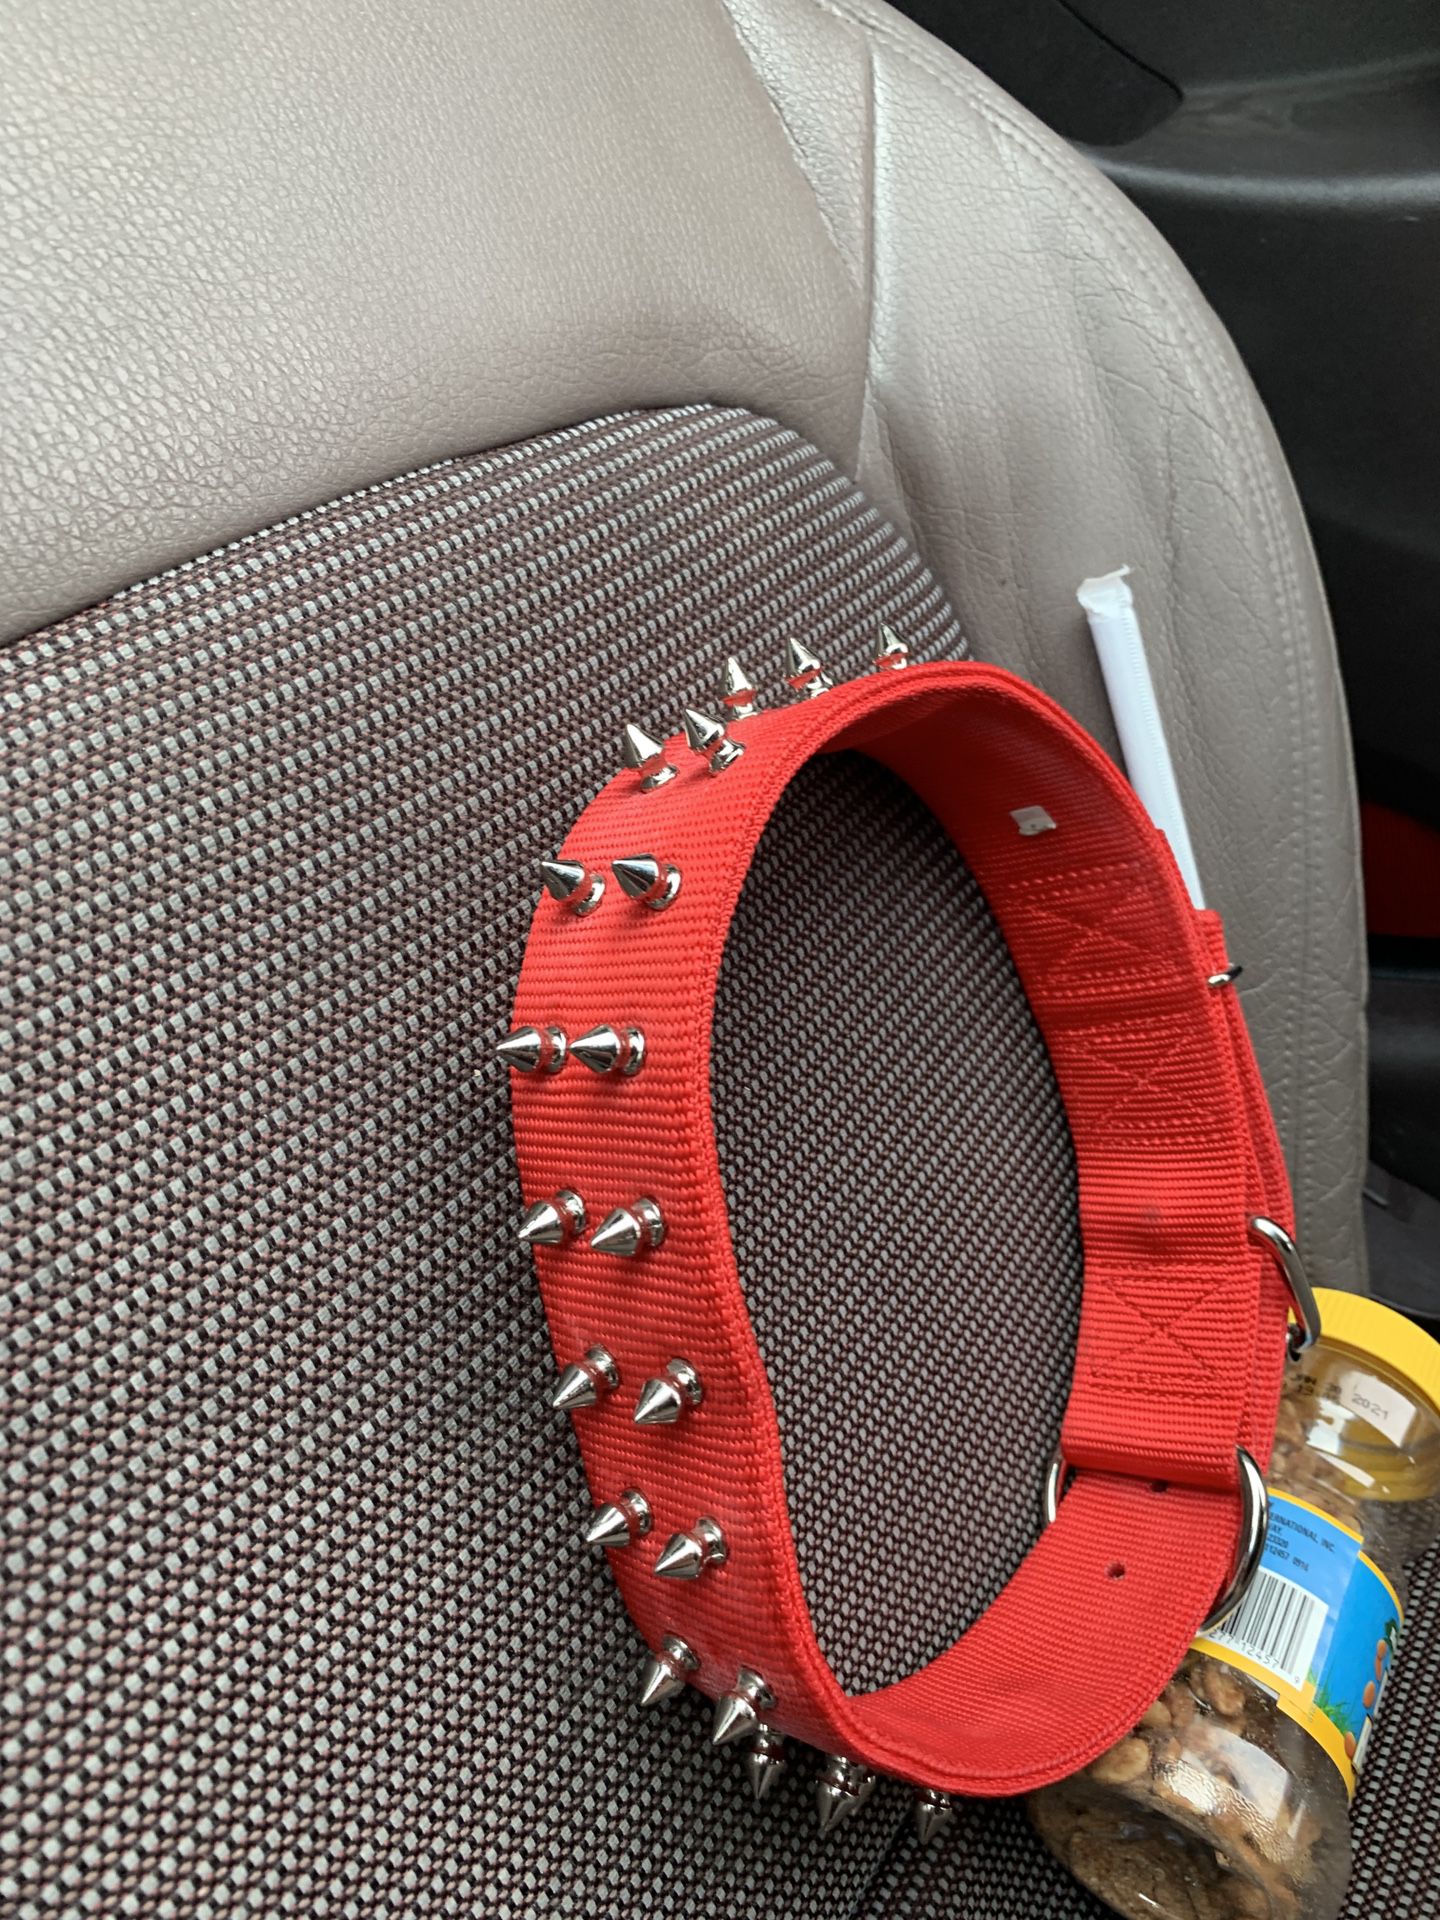 High-quality extra large double spiked dog collar